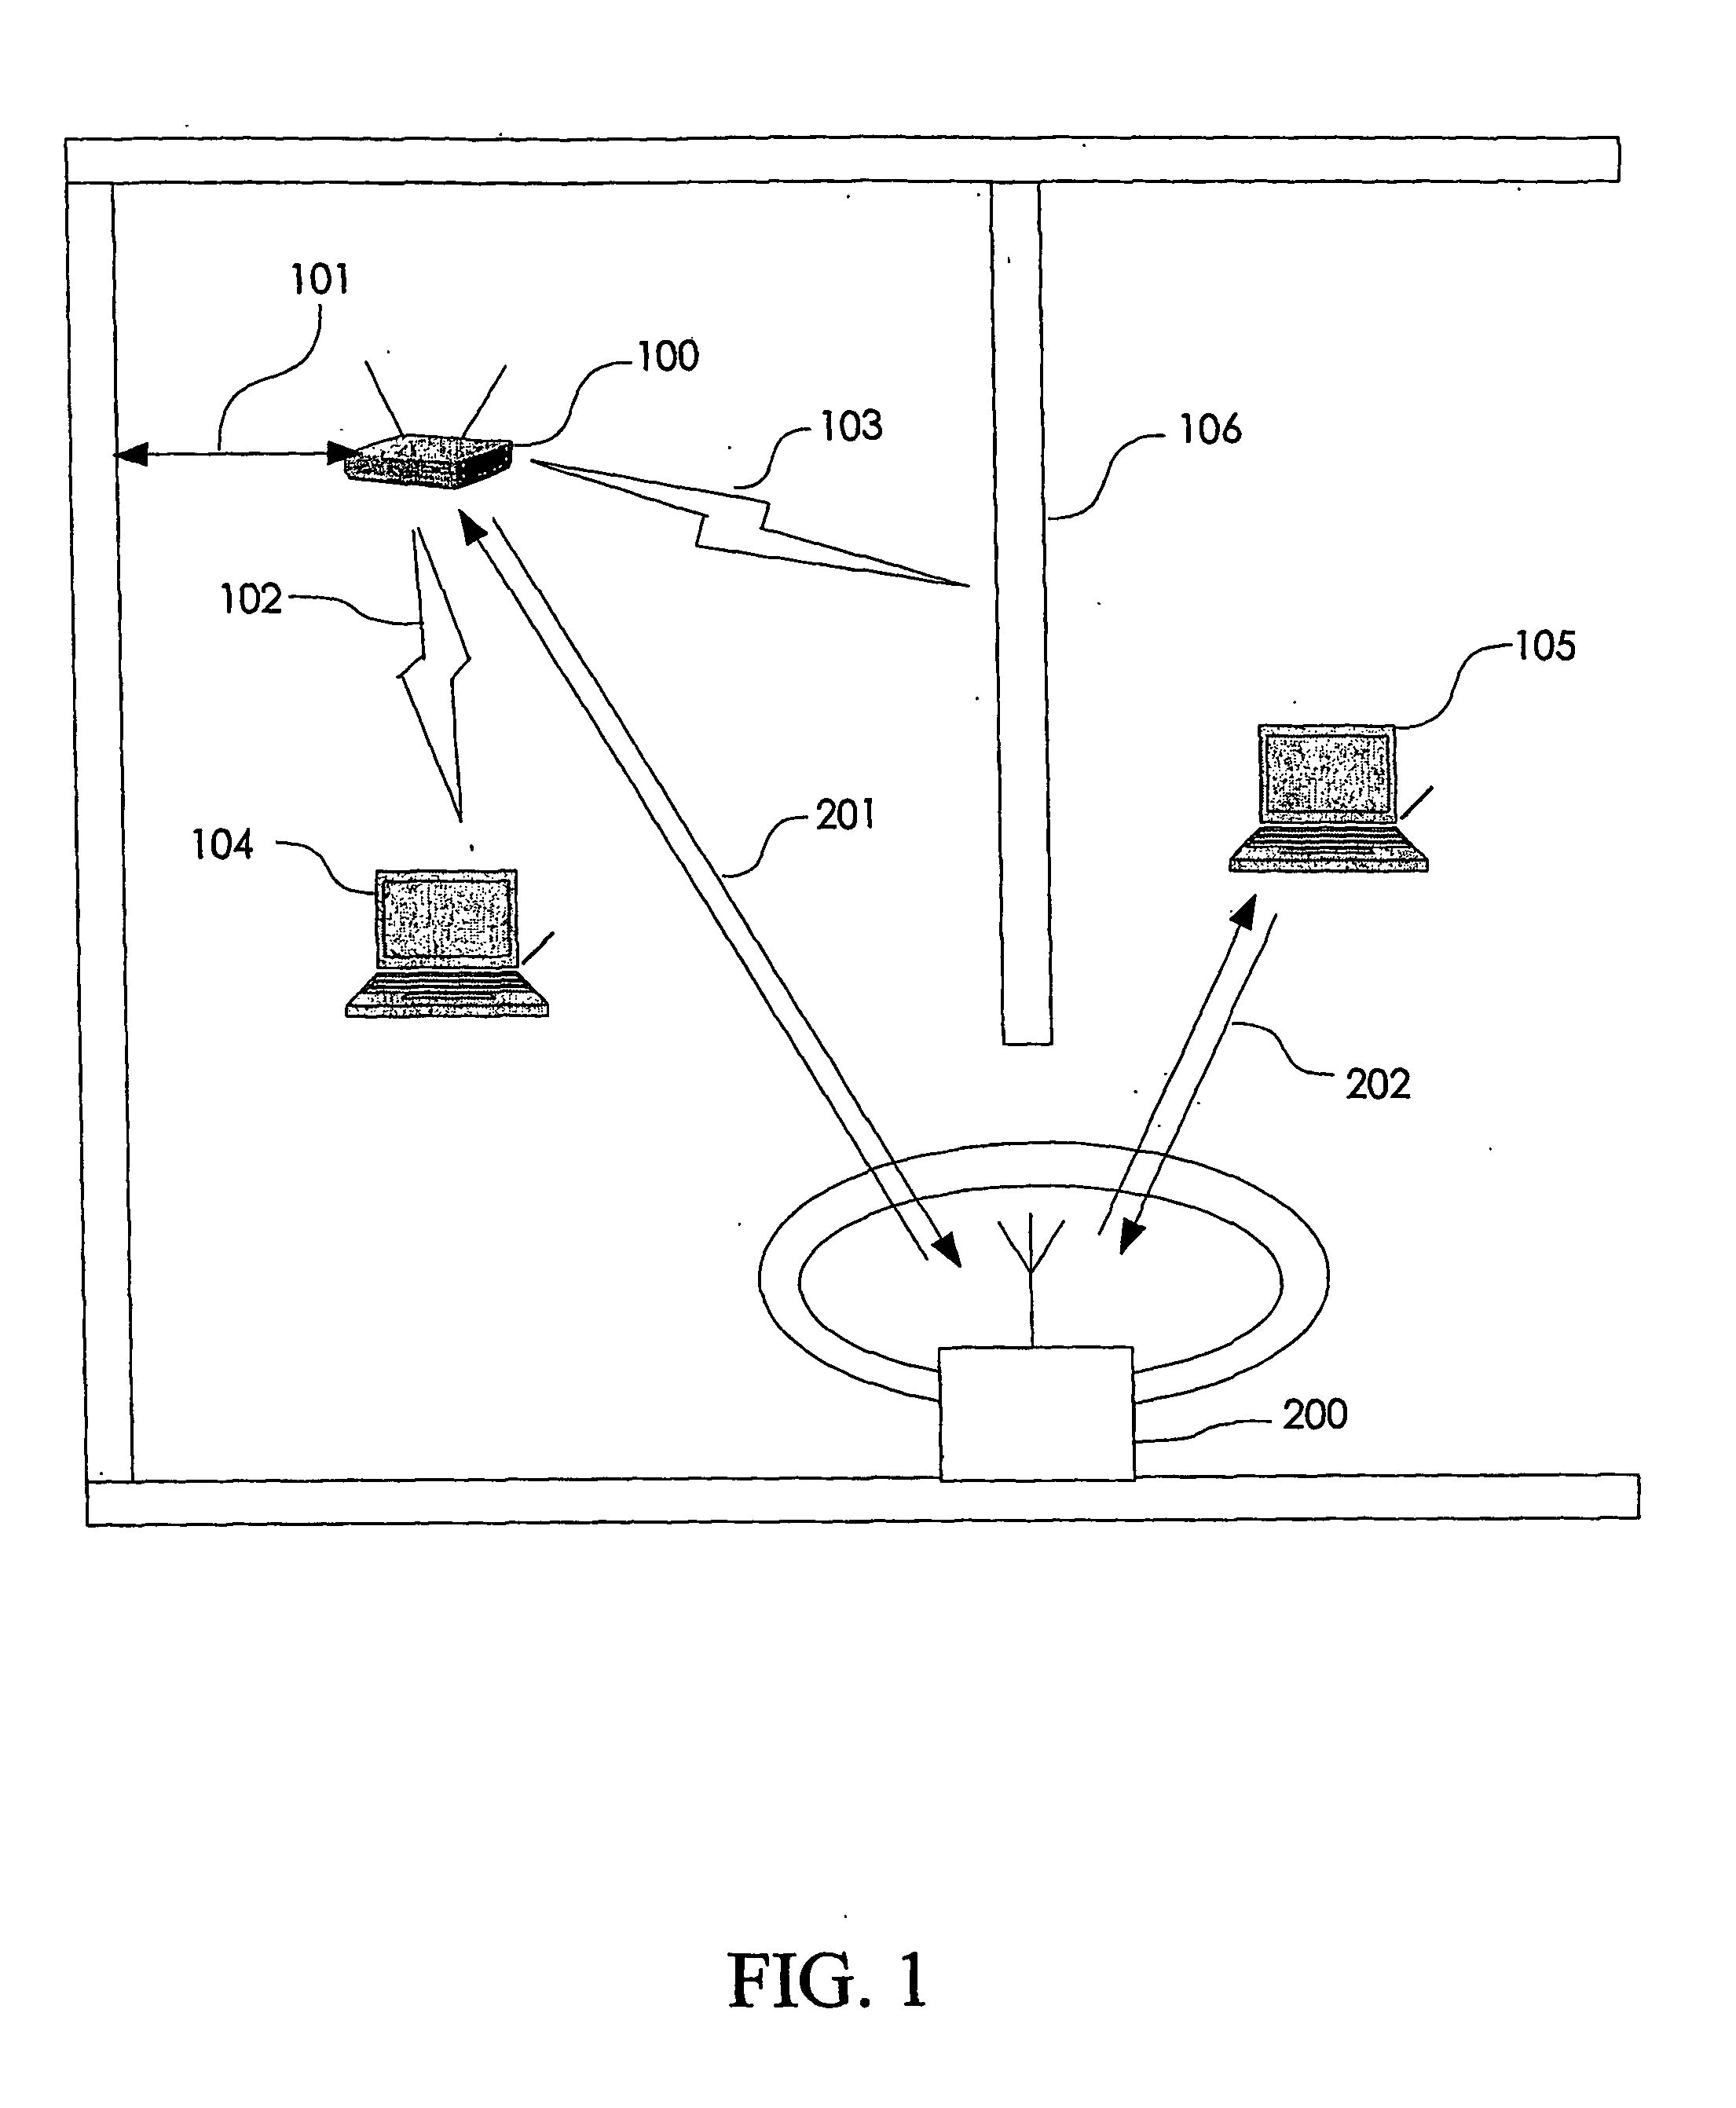 Wireless local area network with repeater for enhancing network coverage